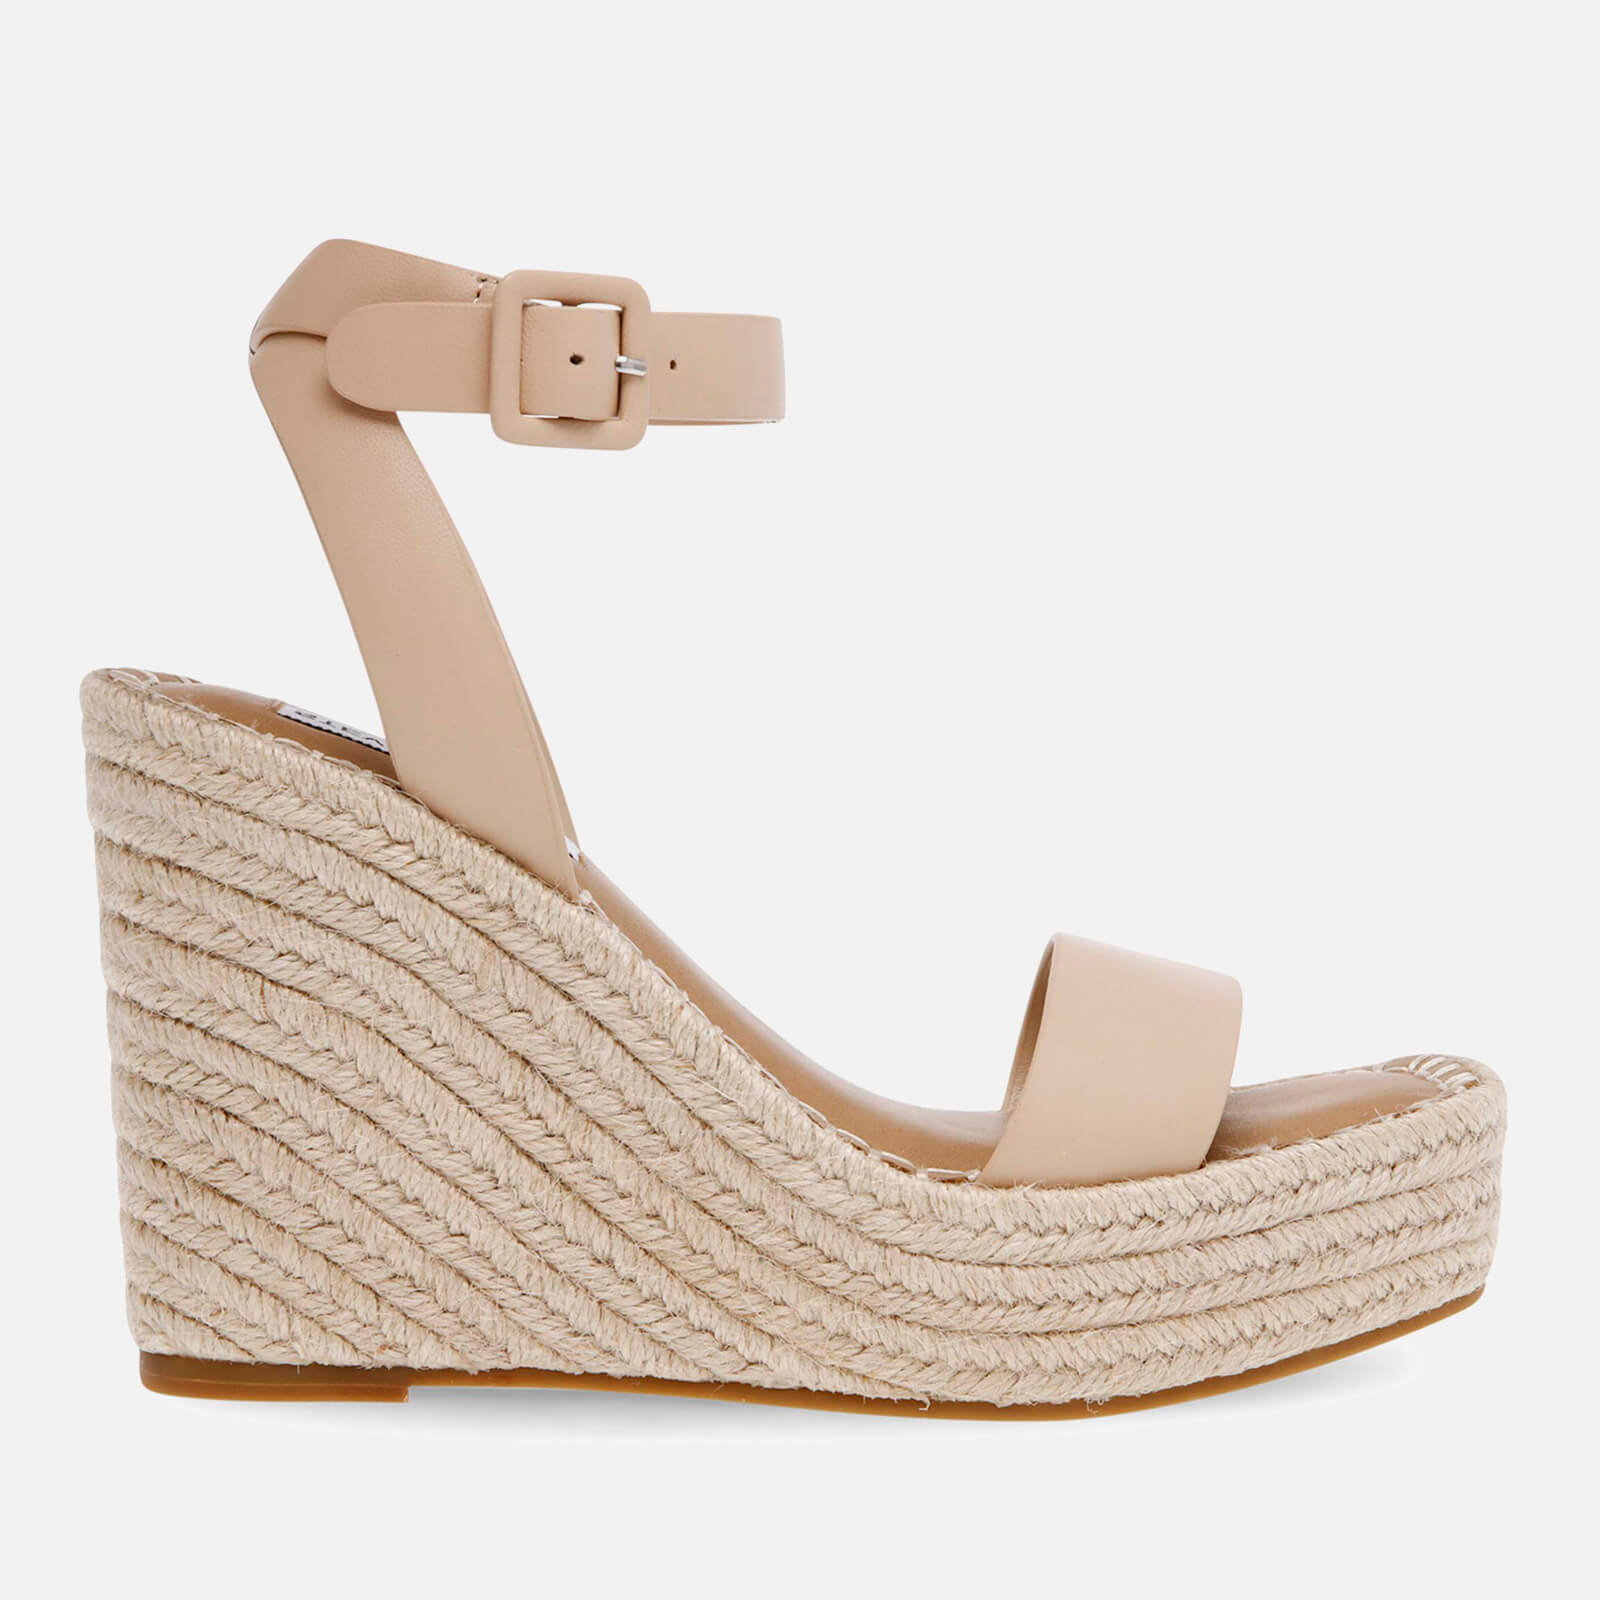 Steve Madden Women’s Upstage Leather Wedge Sandals